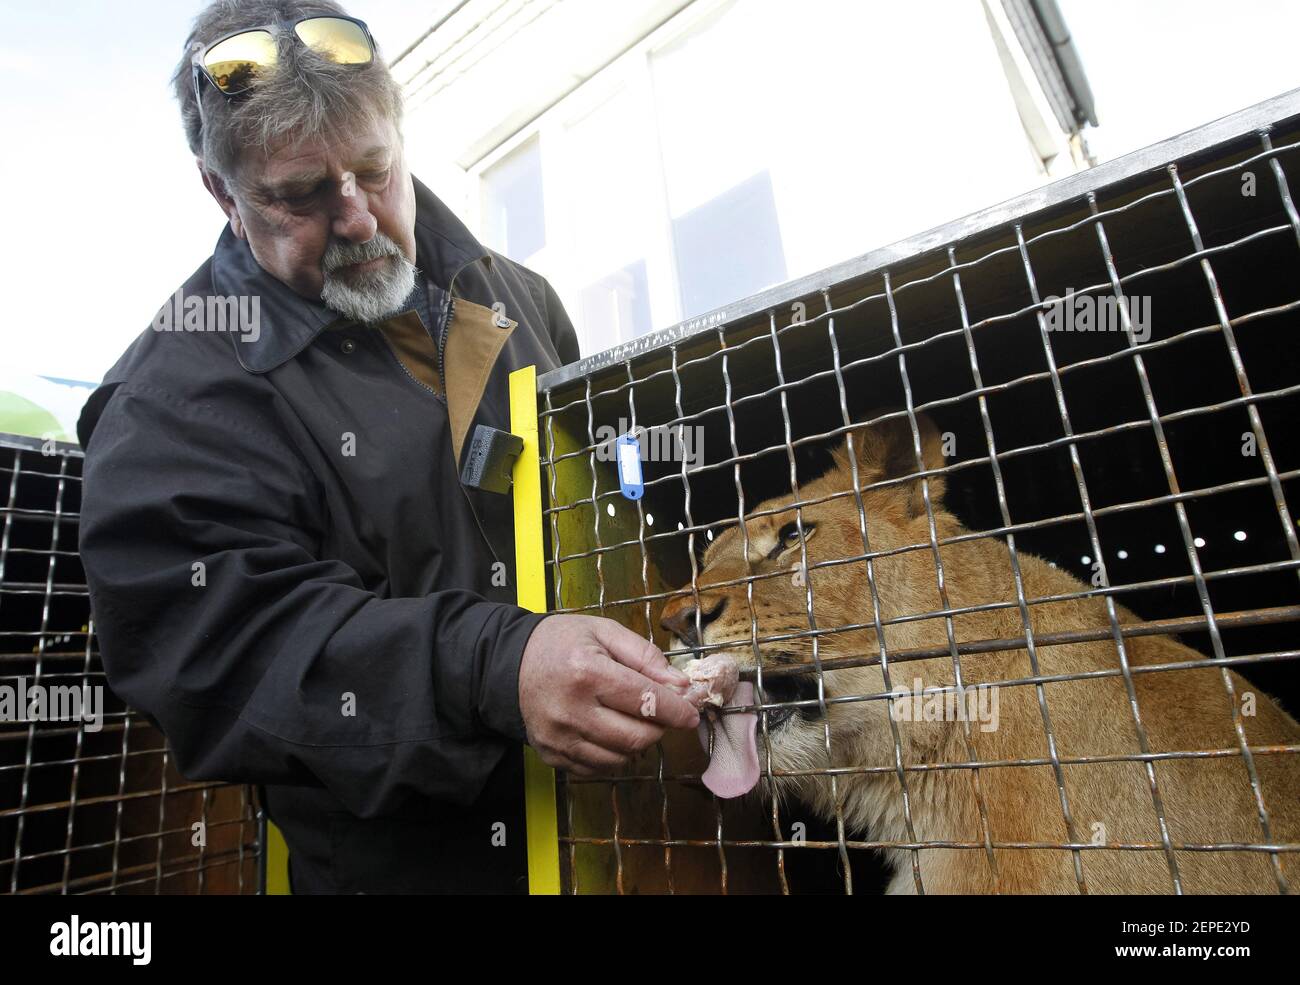 A service staff feeds a lion in a cage in a cargo terminal during their  departure to South Africa from the Boryspil Airport, not so far from Kiev.  Five lion cubs free